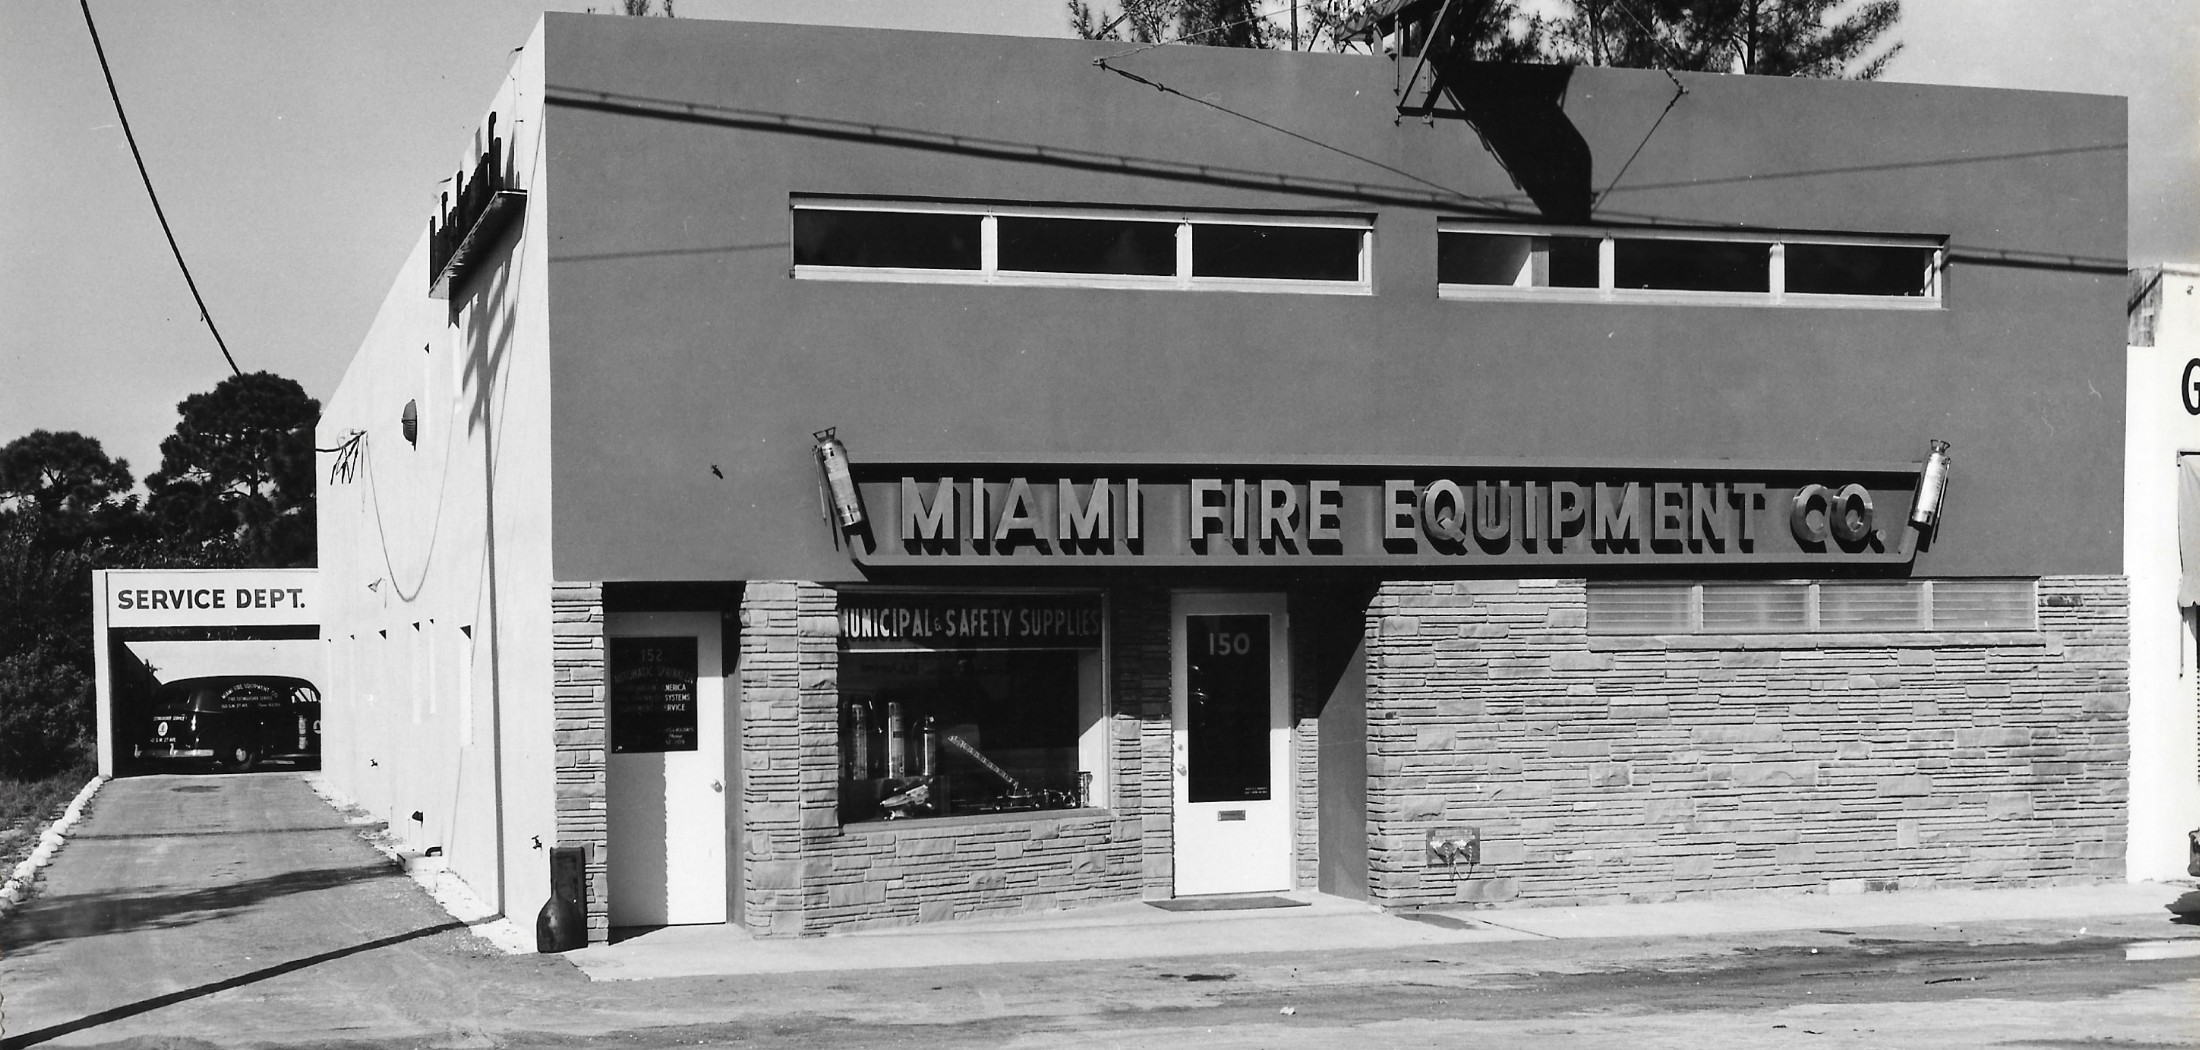 Miami Fire extinguisher Inspection, Maintenance and Testing Since 1950!